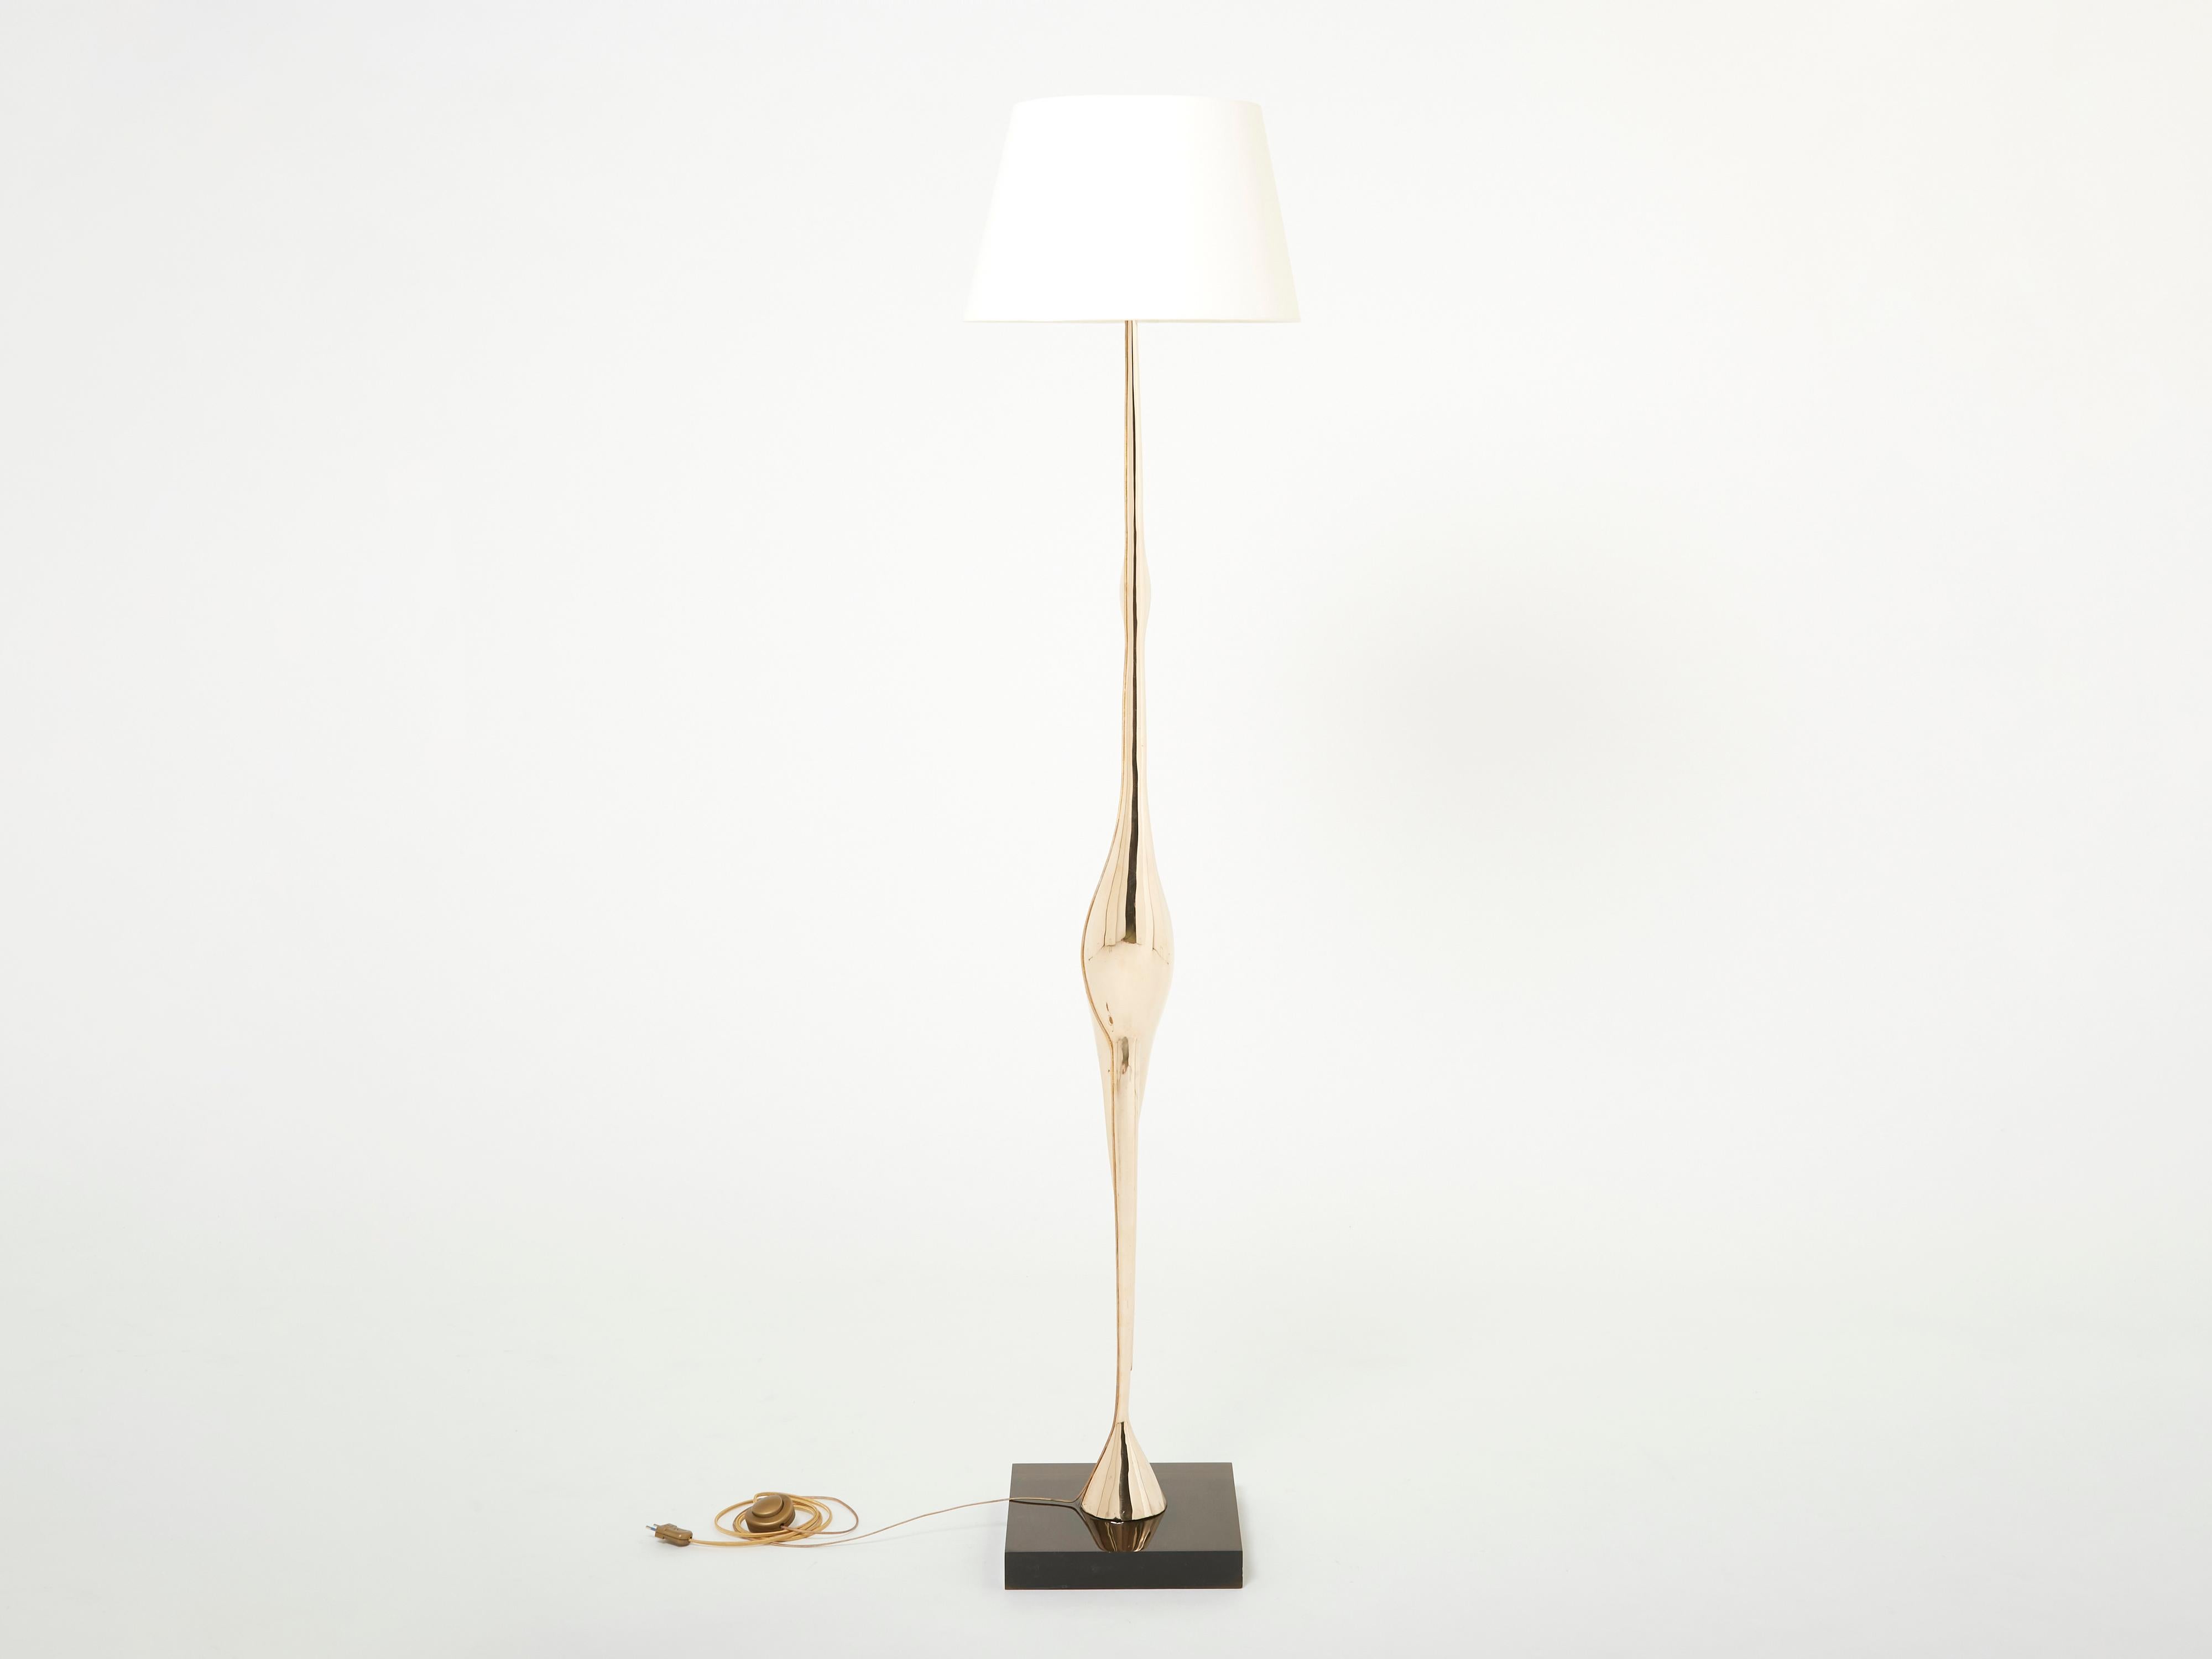 Late 20th Century Signed René Broissand Polished Bronze Lucite Heron Floor Lamp, 1970s